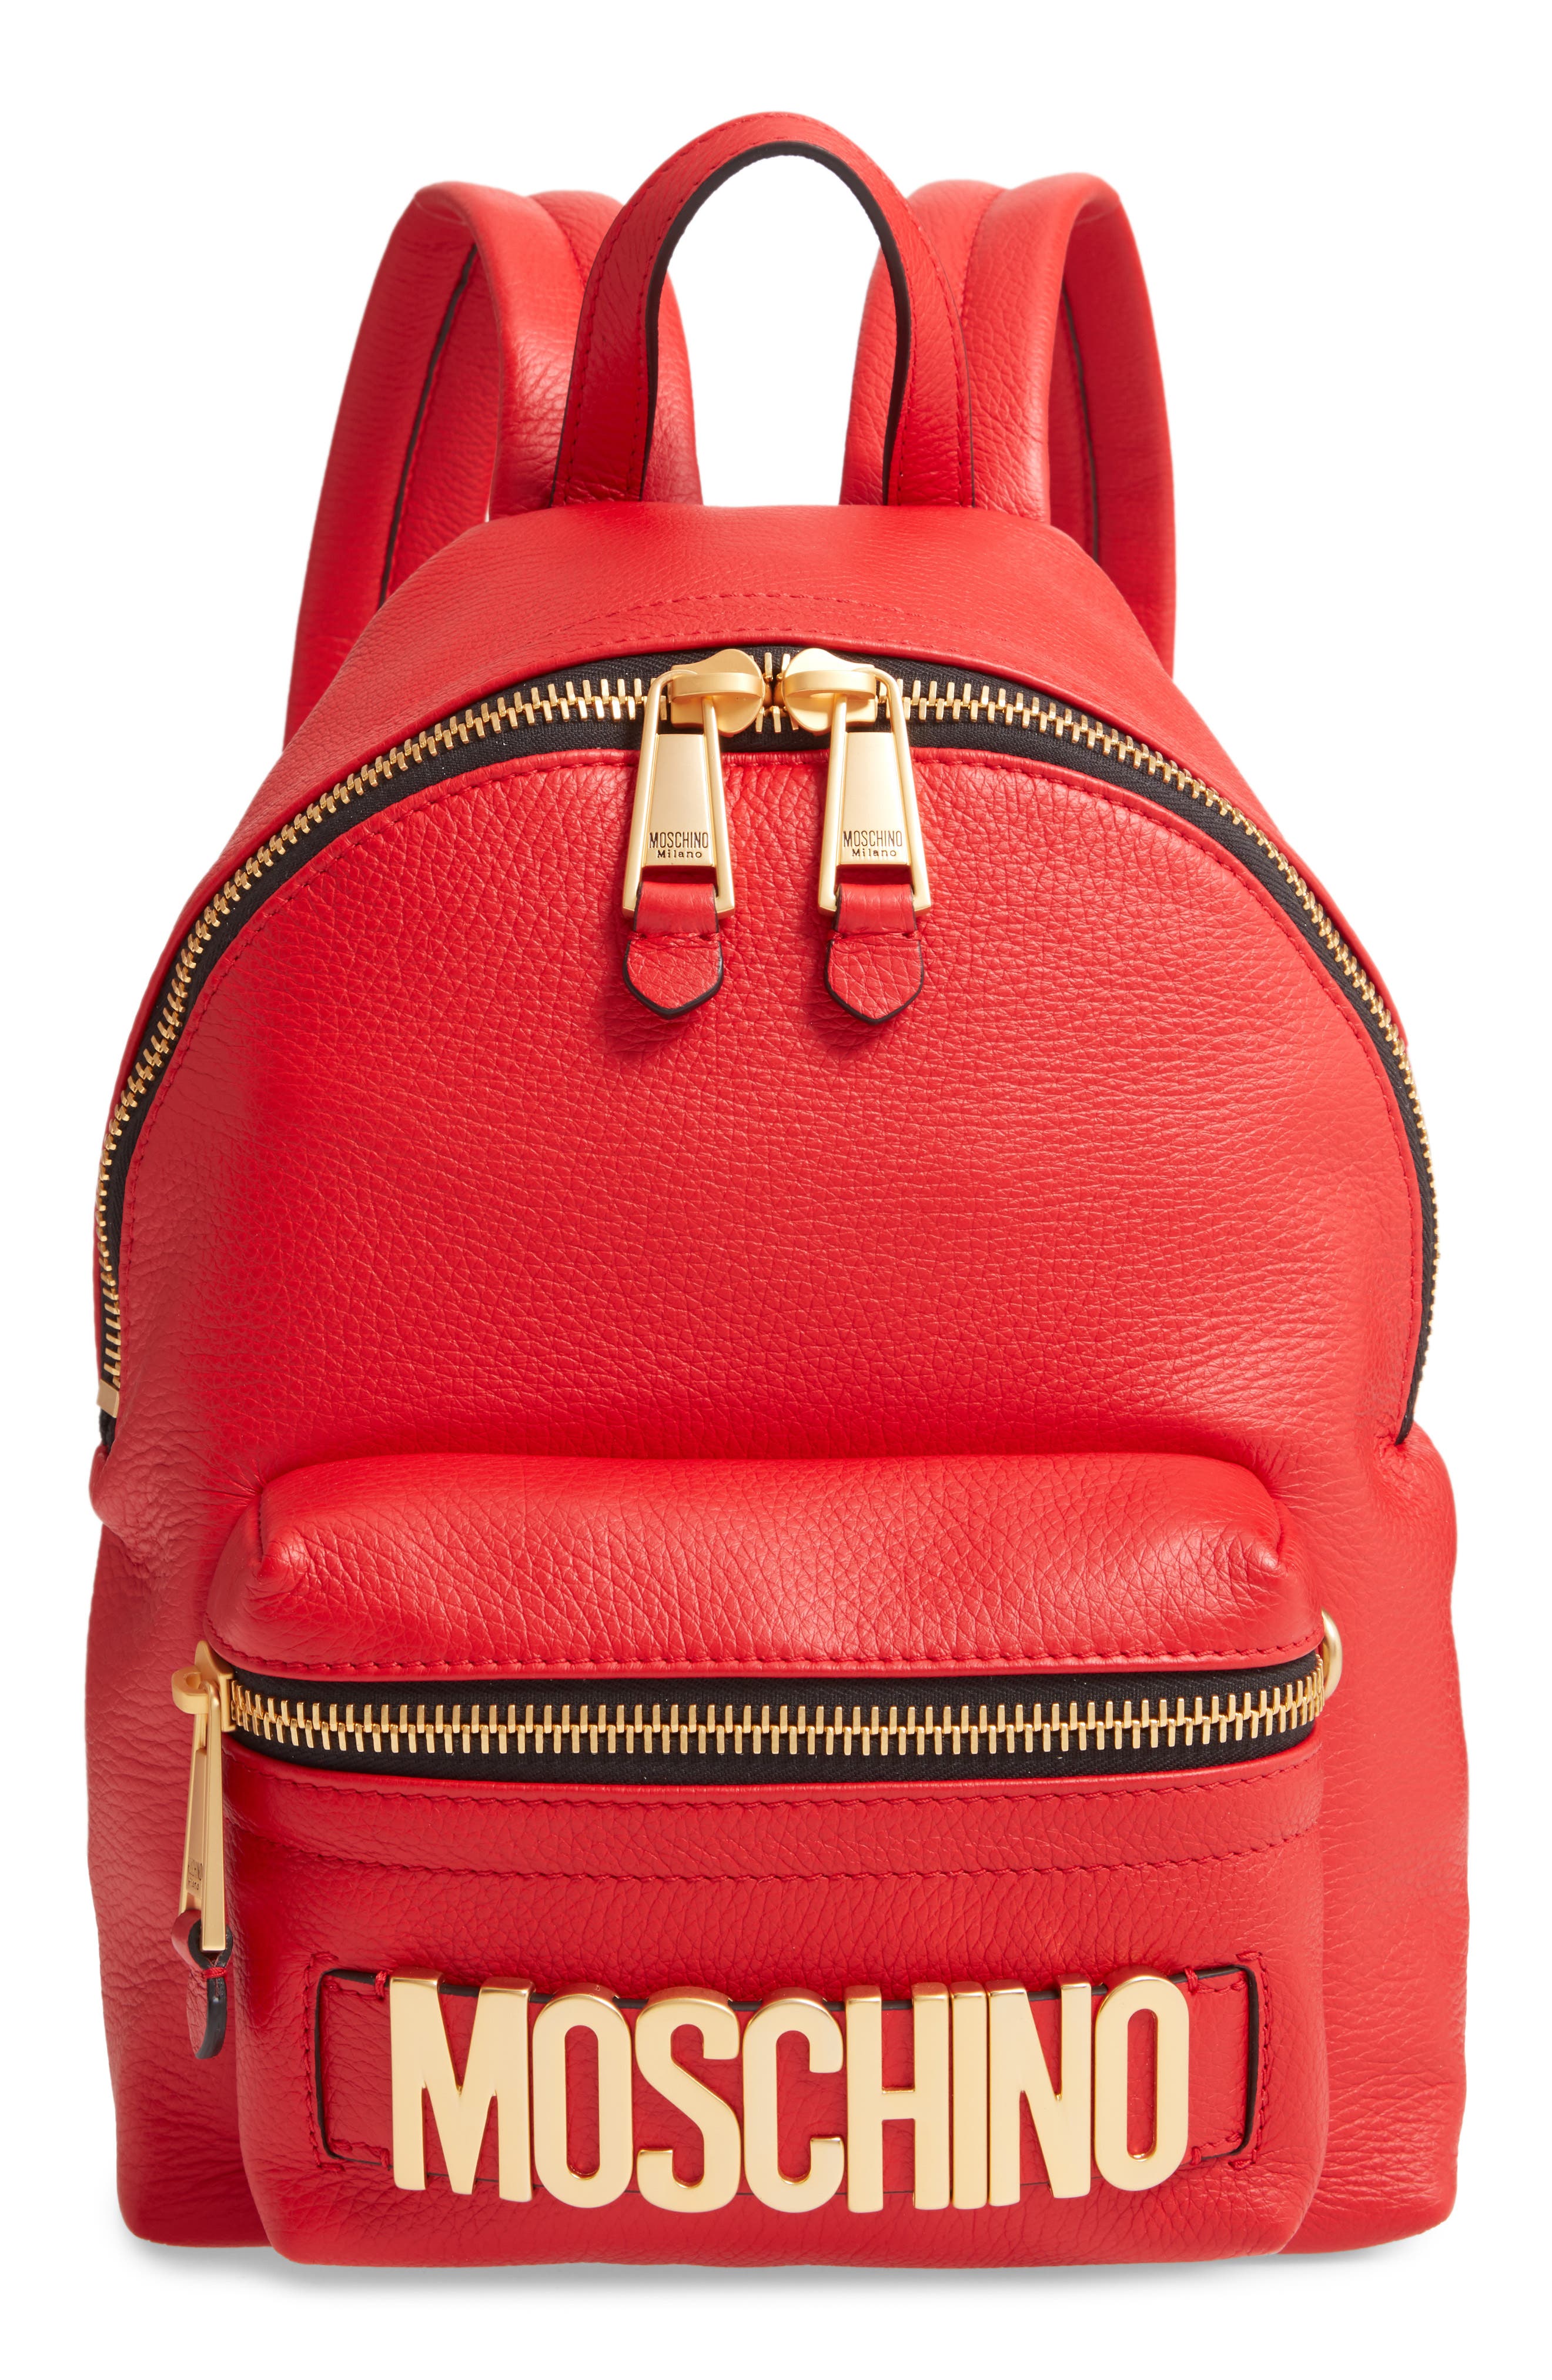 Moschino Logo Leather Backpack | Nordstrom